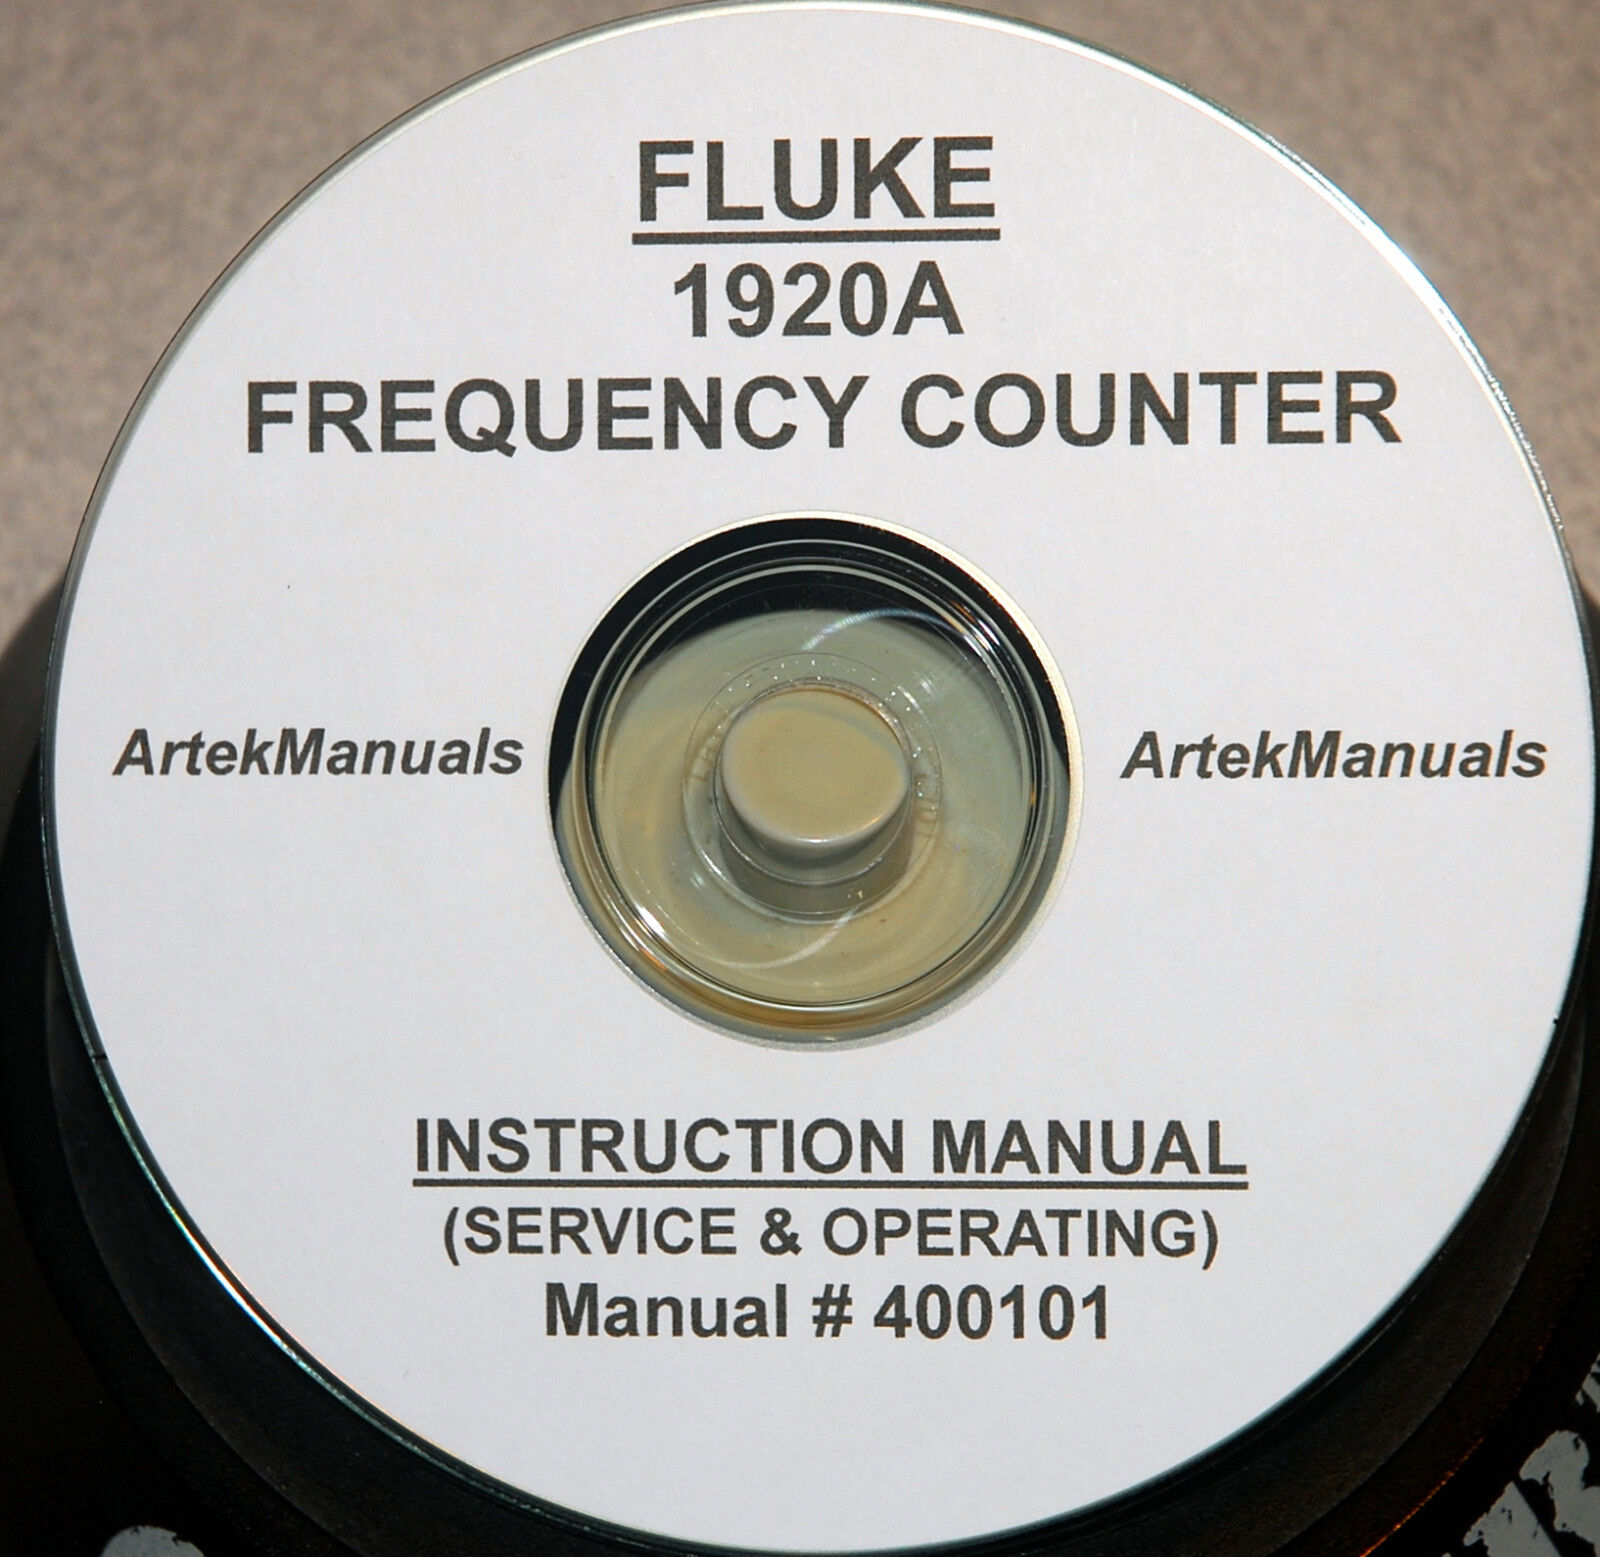 FLUKE 1920A FREQUENCY COUNTER, OPERATING & SERVICE MANUAL